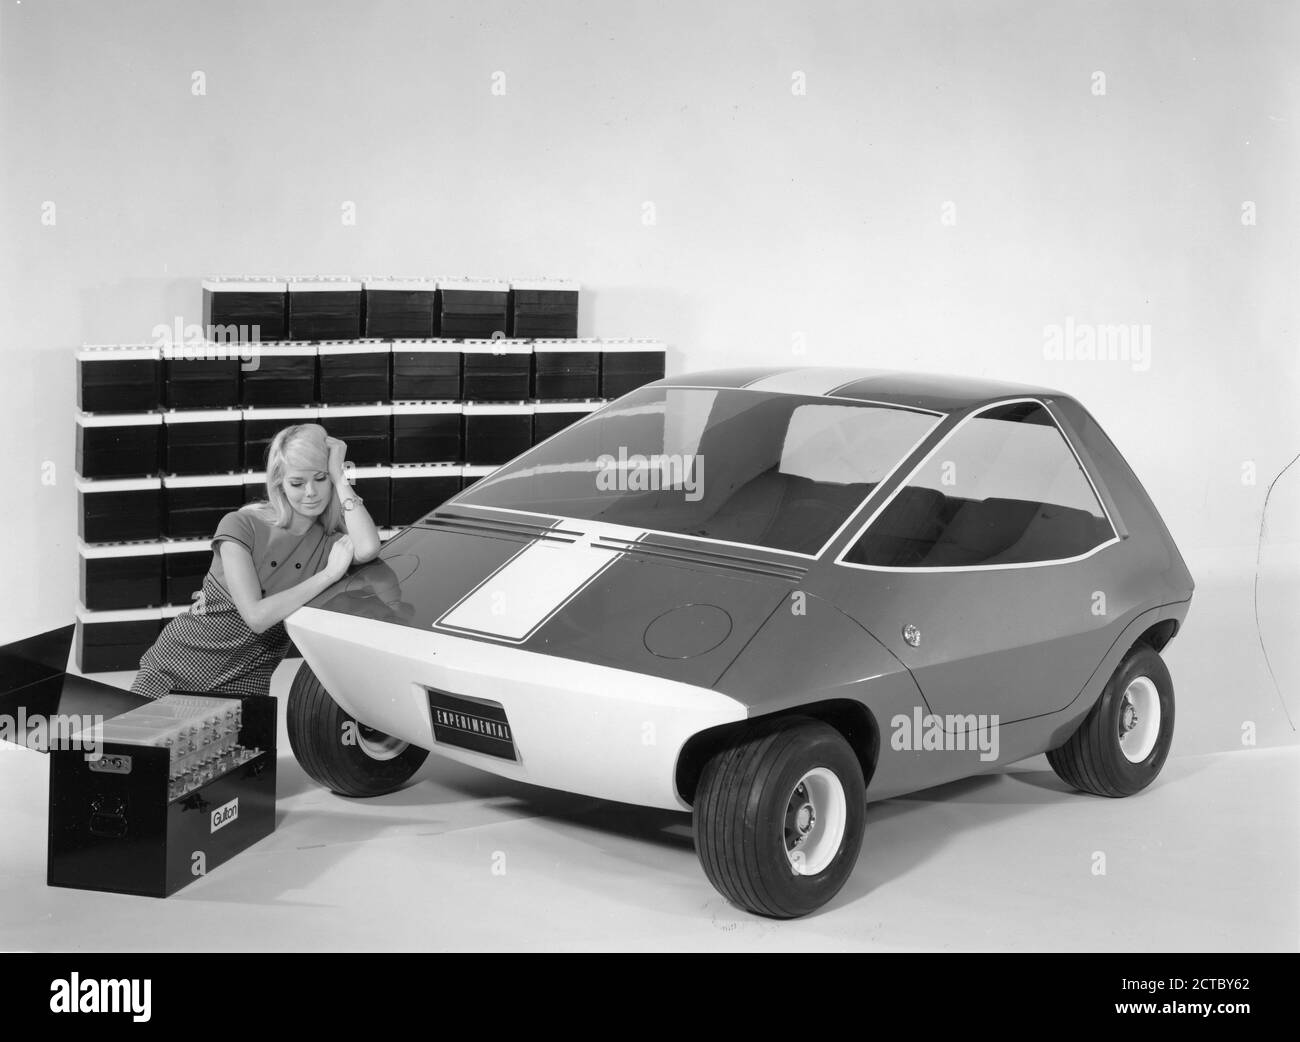 Publicity Photo for the Amitron, the American Motors Corporation and Gulton Industries electronic car powered by Gulton's long-life, light-weight lithium battery system. The AM prototype vehicle seen here is a  three-passenger car designed for short-haul transportation needs. The case in the foreground contains one-half of the lithium system, which is the equivalent in power to the 45 conventional automotive batteries, shown in the background, Detroit, MI, 1968. (Photo by RBM Vintage Images) Stock Photo